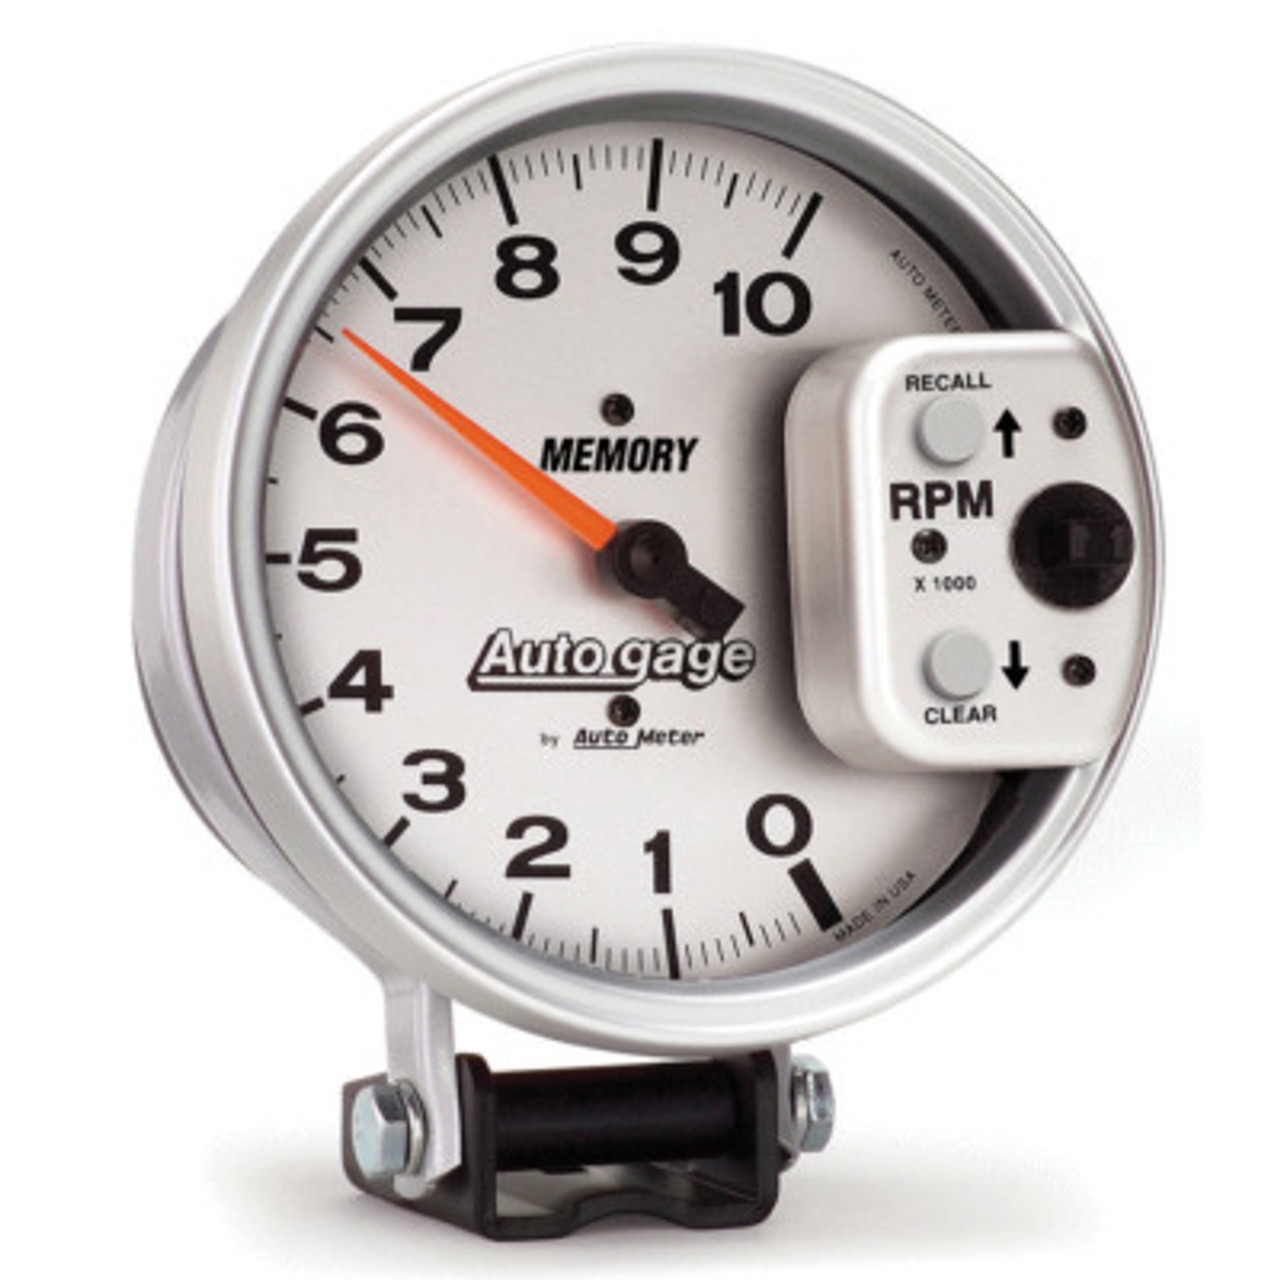 ATM233907, 5IN AUTO GAGE MONSTER TACH W RECALL